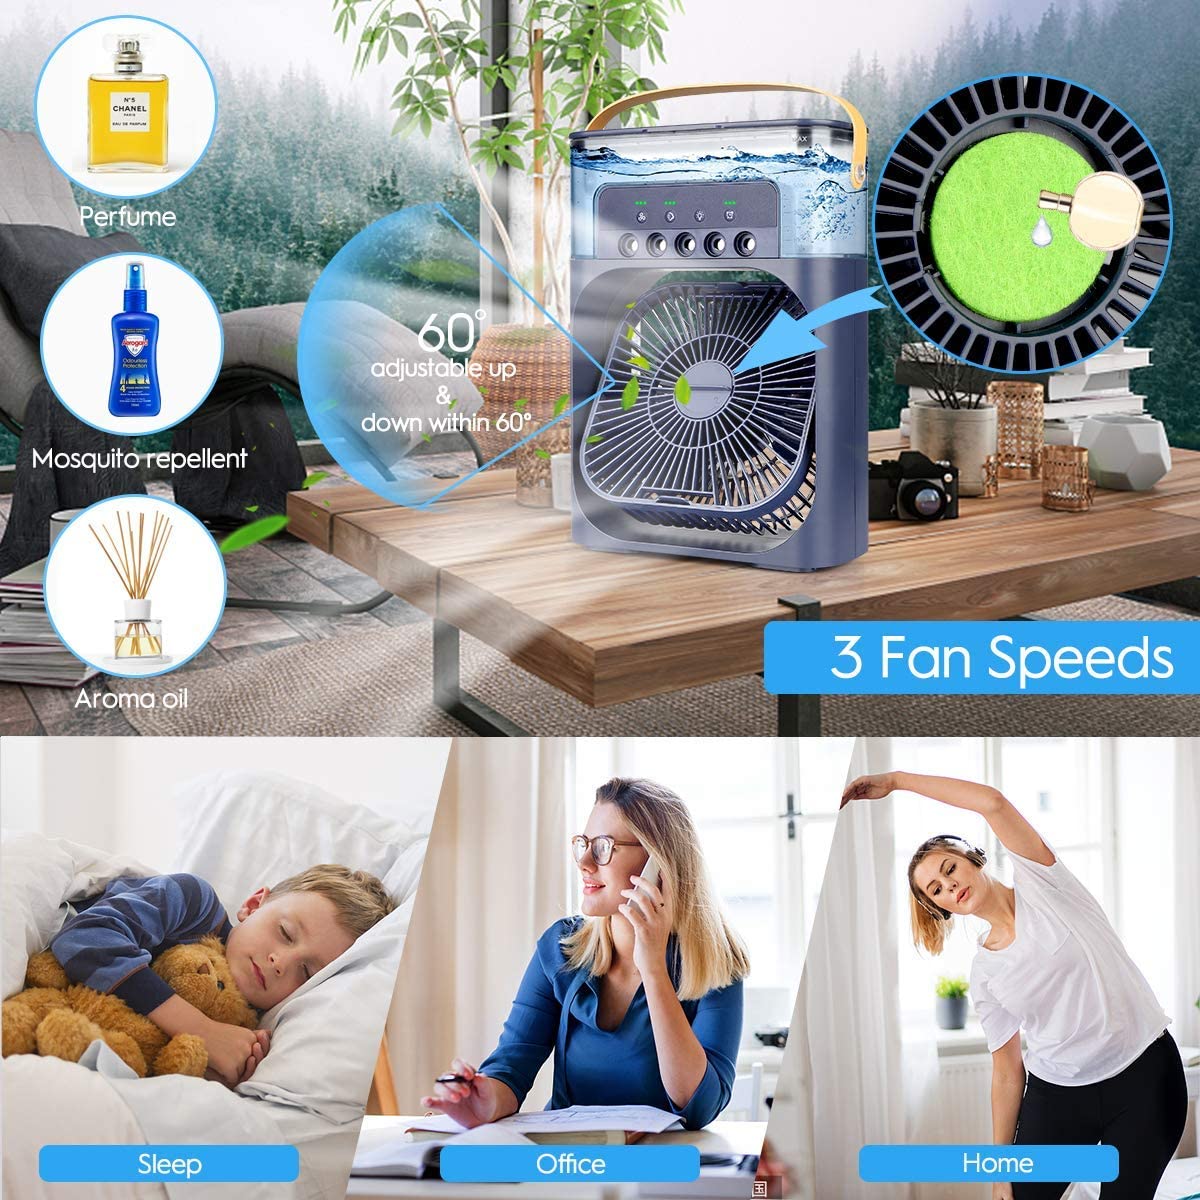 ( NET) USB Portable Air Cooler Fan Air Conditioner Light Desktop Fan Air Cooler Humidifier Purify Bedroom with 7 Colors LED Night Light KC-23-23